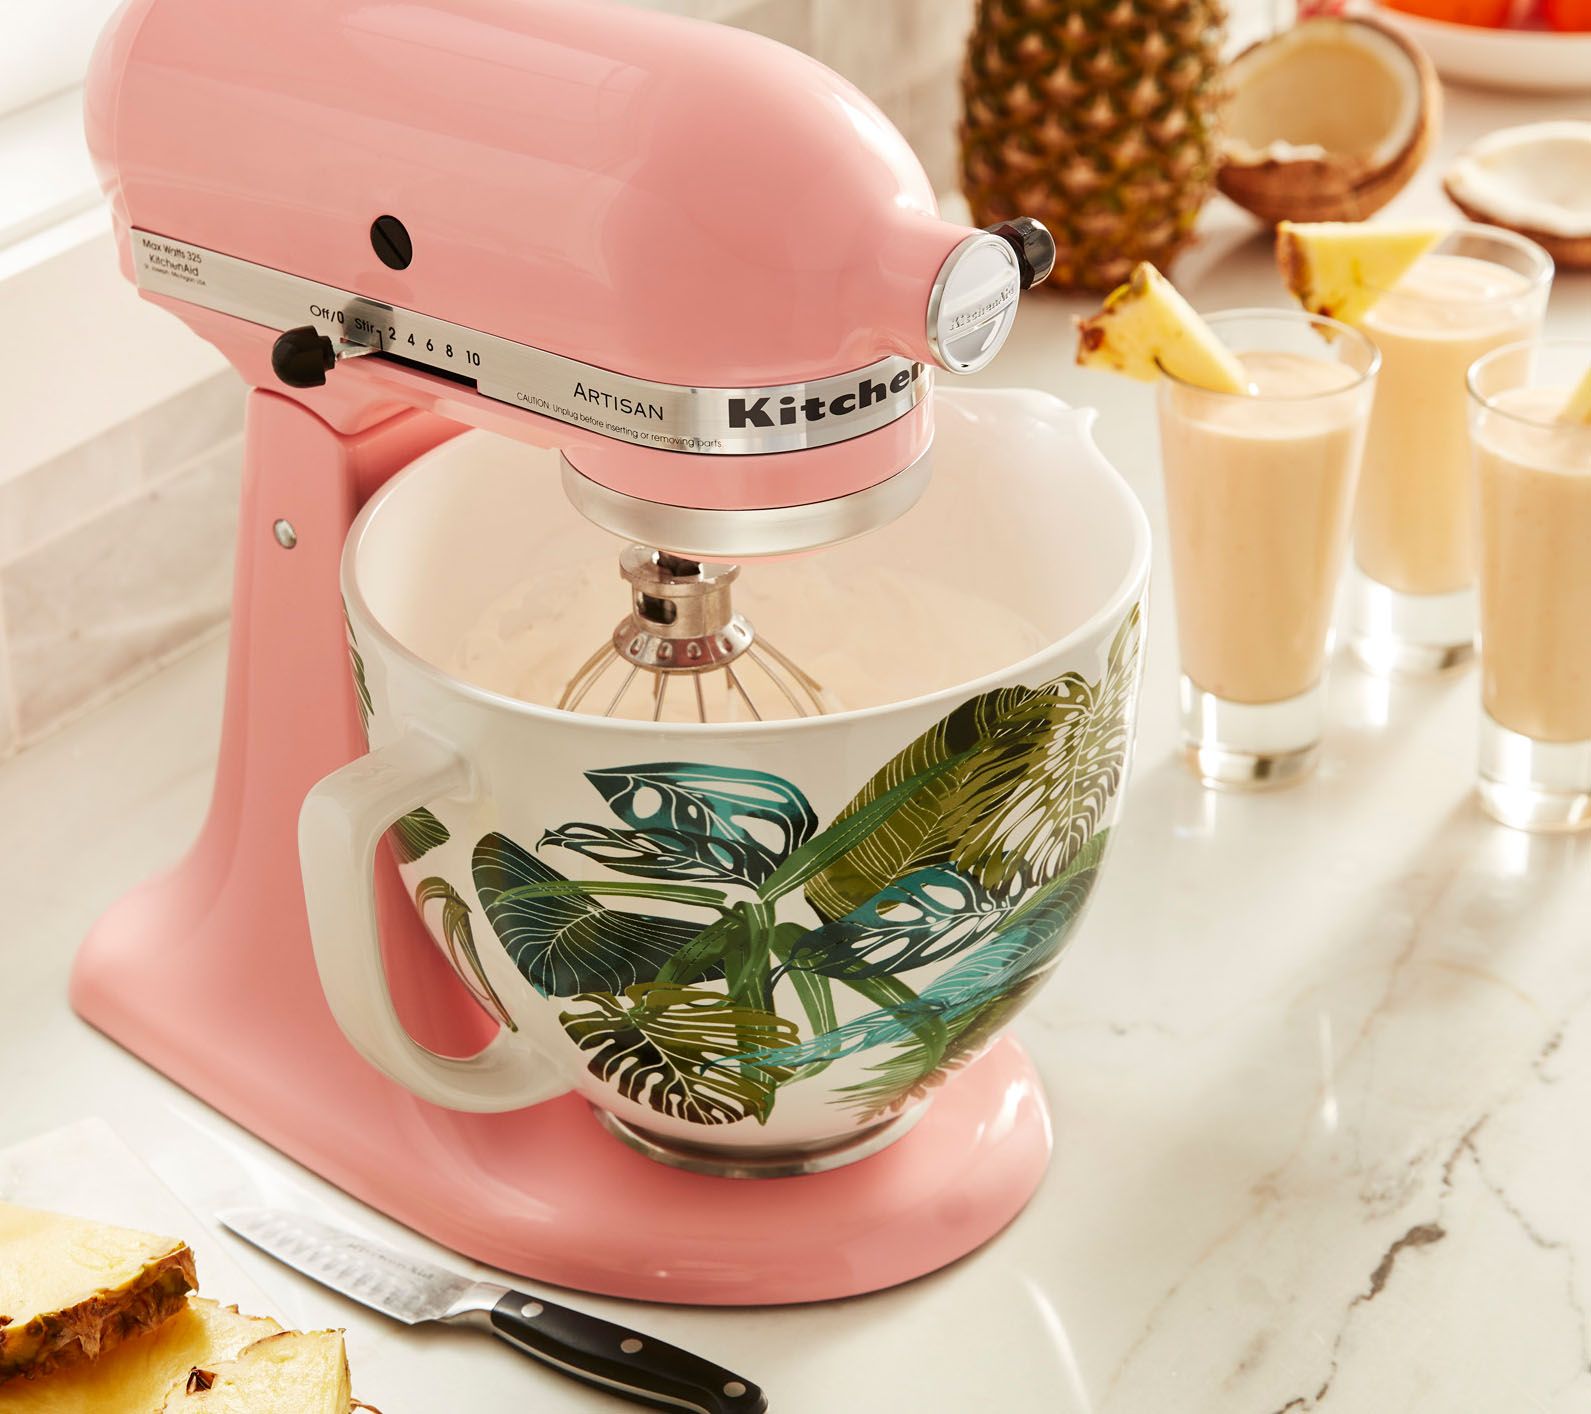 KitchenAid Created New Stand Mixer Ceramic Bowls With Fun Patterns - New  KitchenAid Products Spring 2019